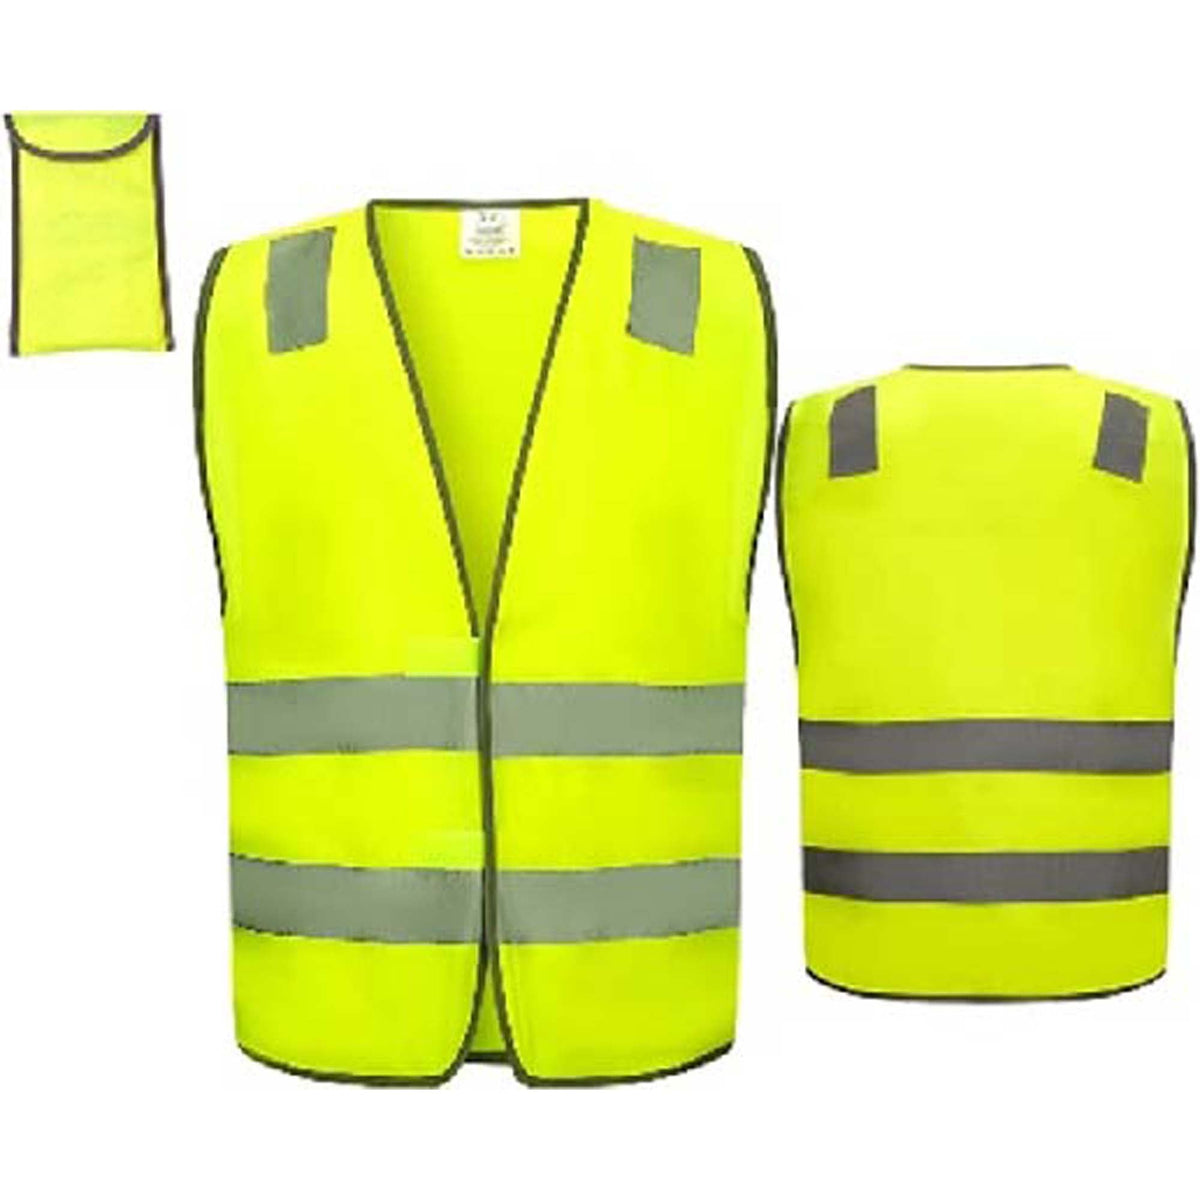 KBW GLOBAL CORP Costume Accessories Reflective Construction Vest for Adults, 1 Count 831687051784